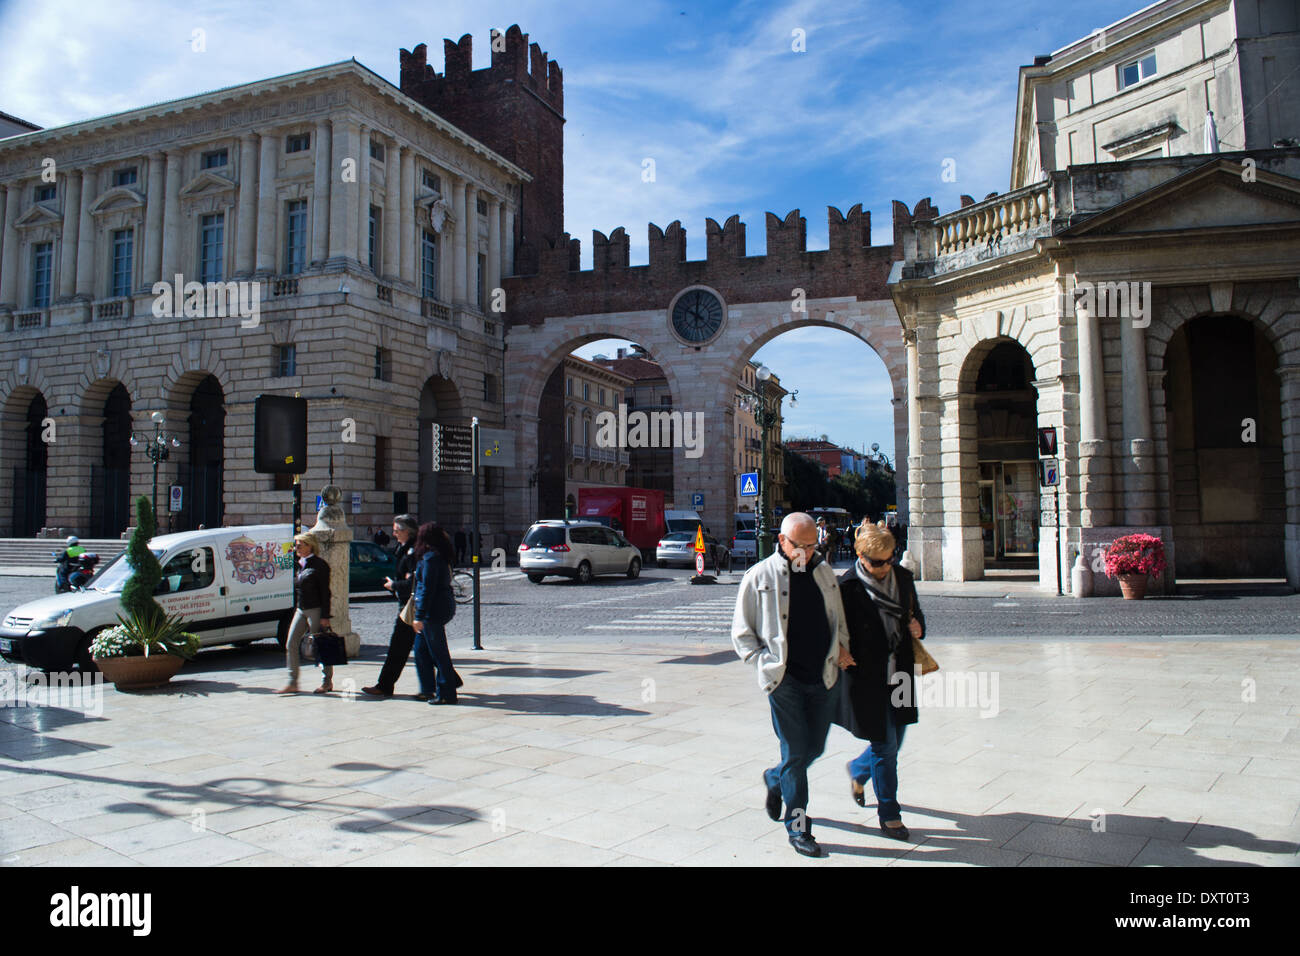 april 26,2012.Verona,italy.restaurants for tourists in the brà  square in front of the famous arena Stock Photo